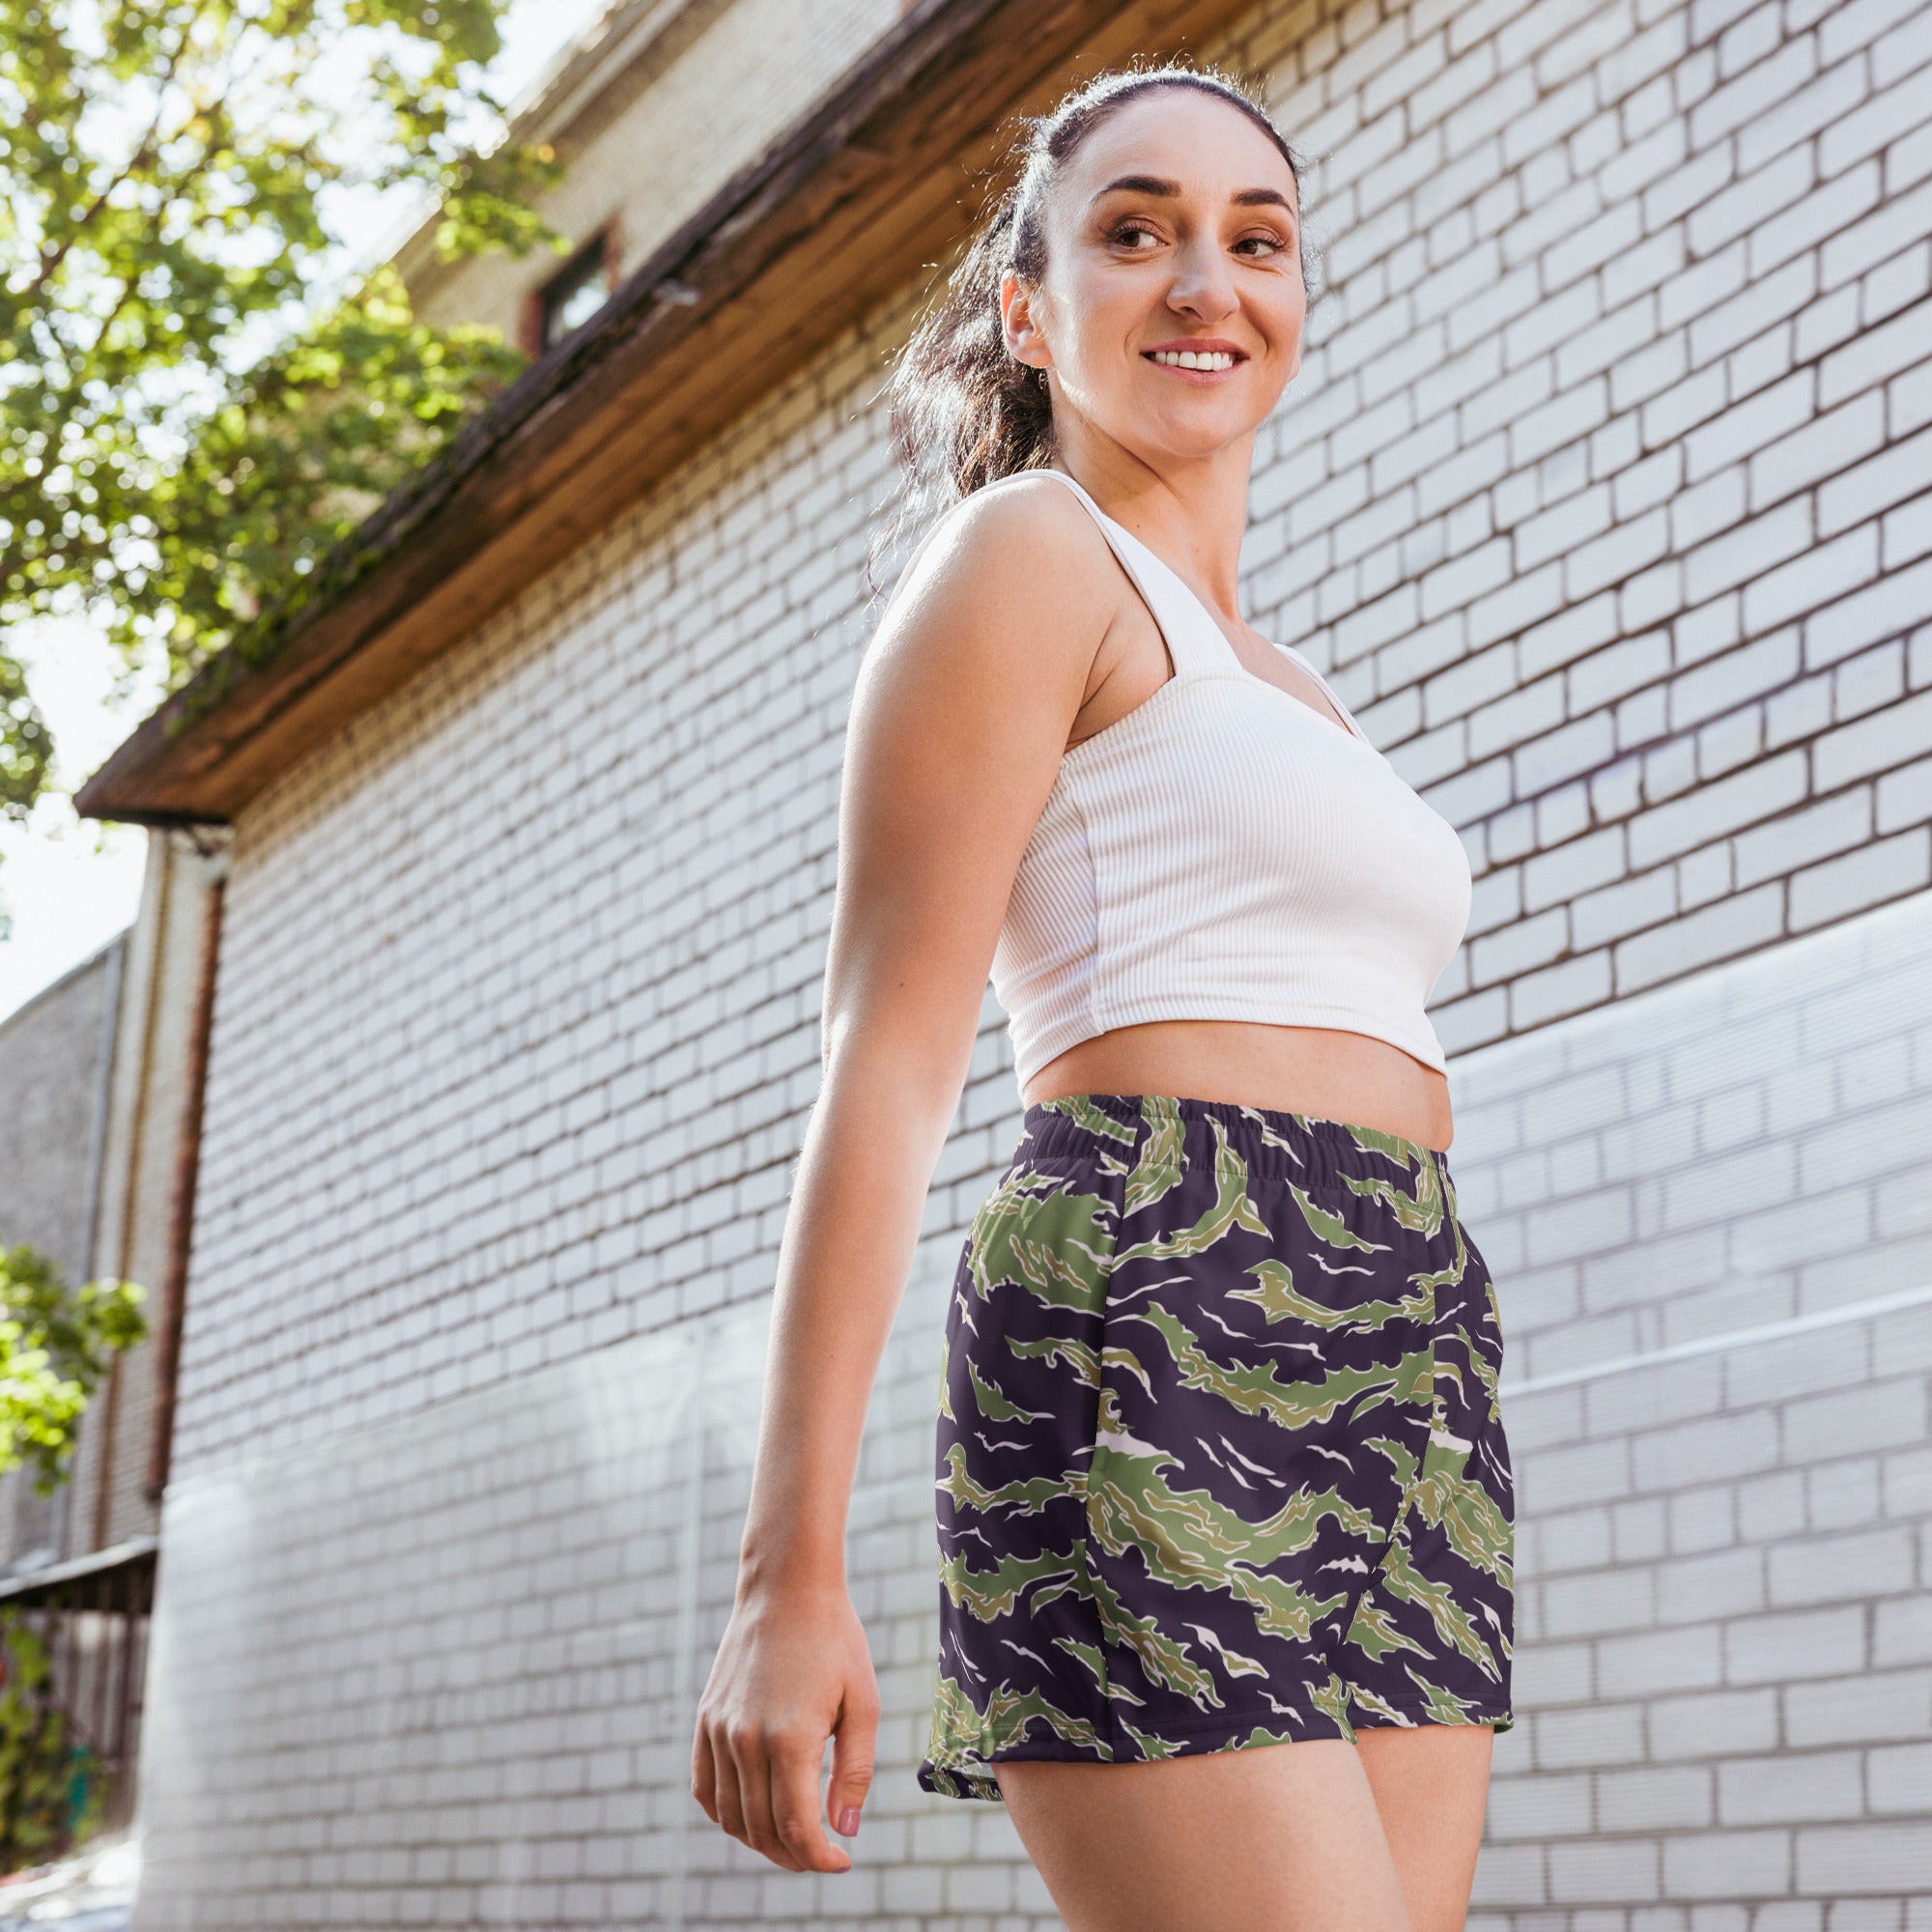 Tiger Stripe Camo Women’s Recycled Athletic Shorts